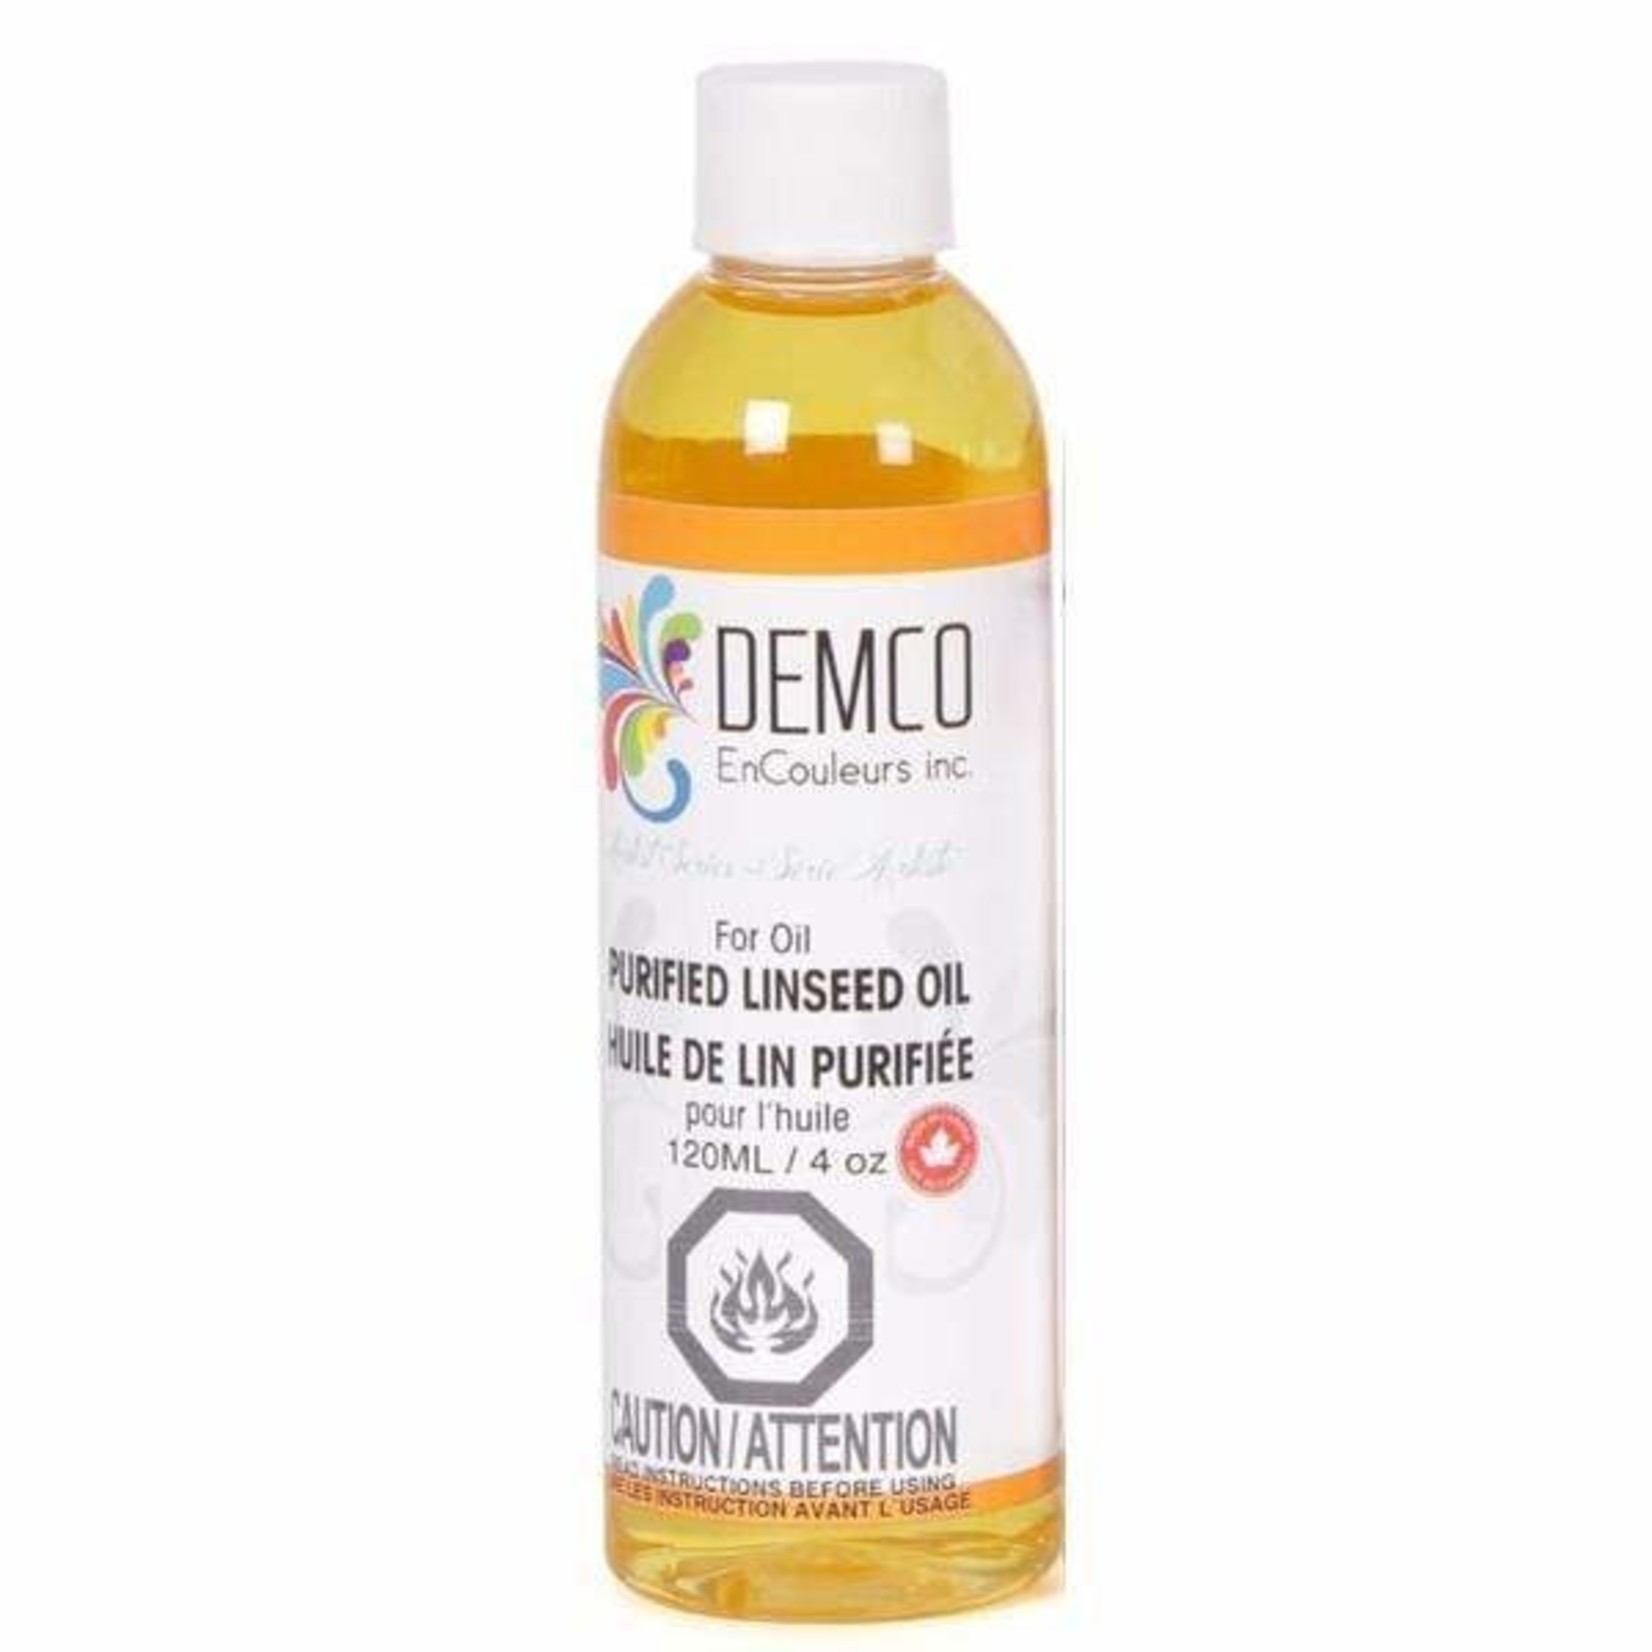 DEMCO PURIFIED LINSEED OIL 120ML/4OZ